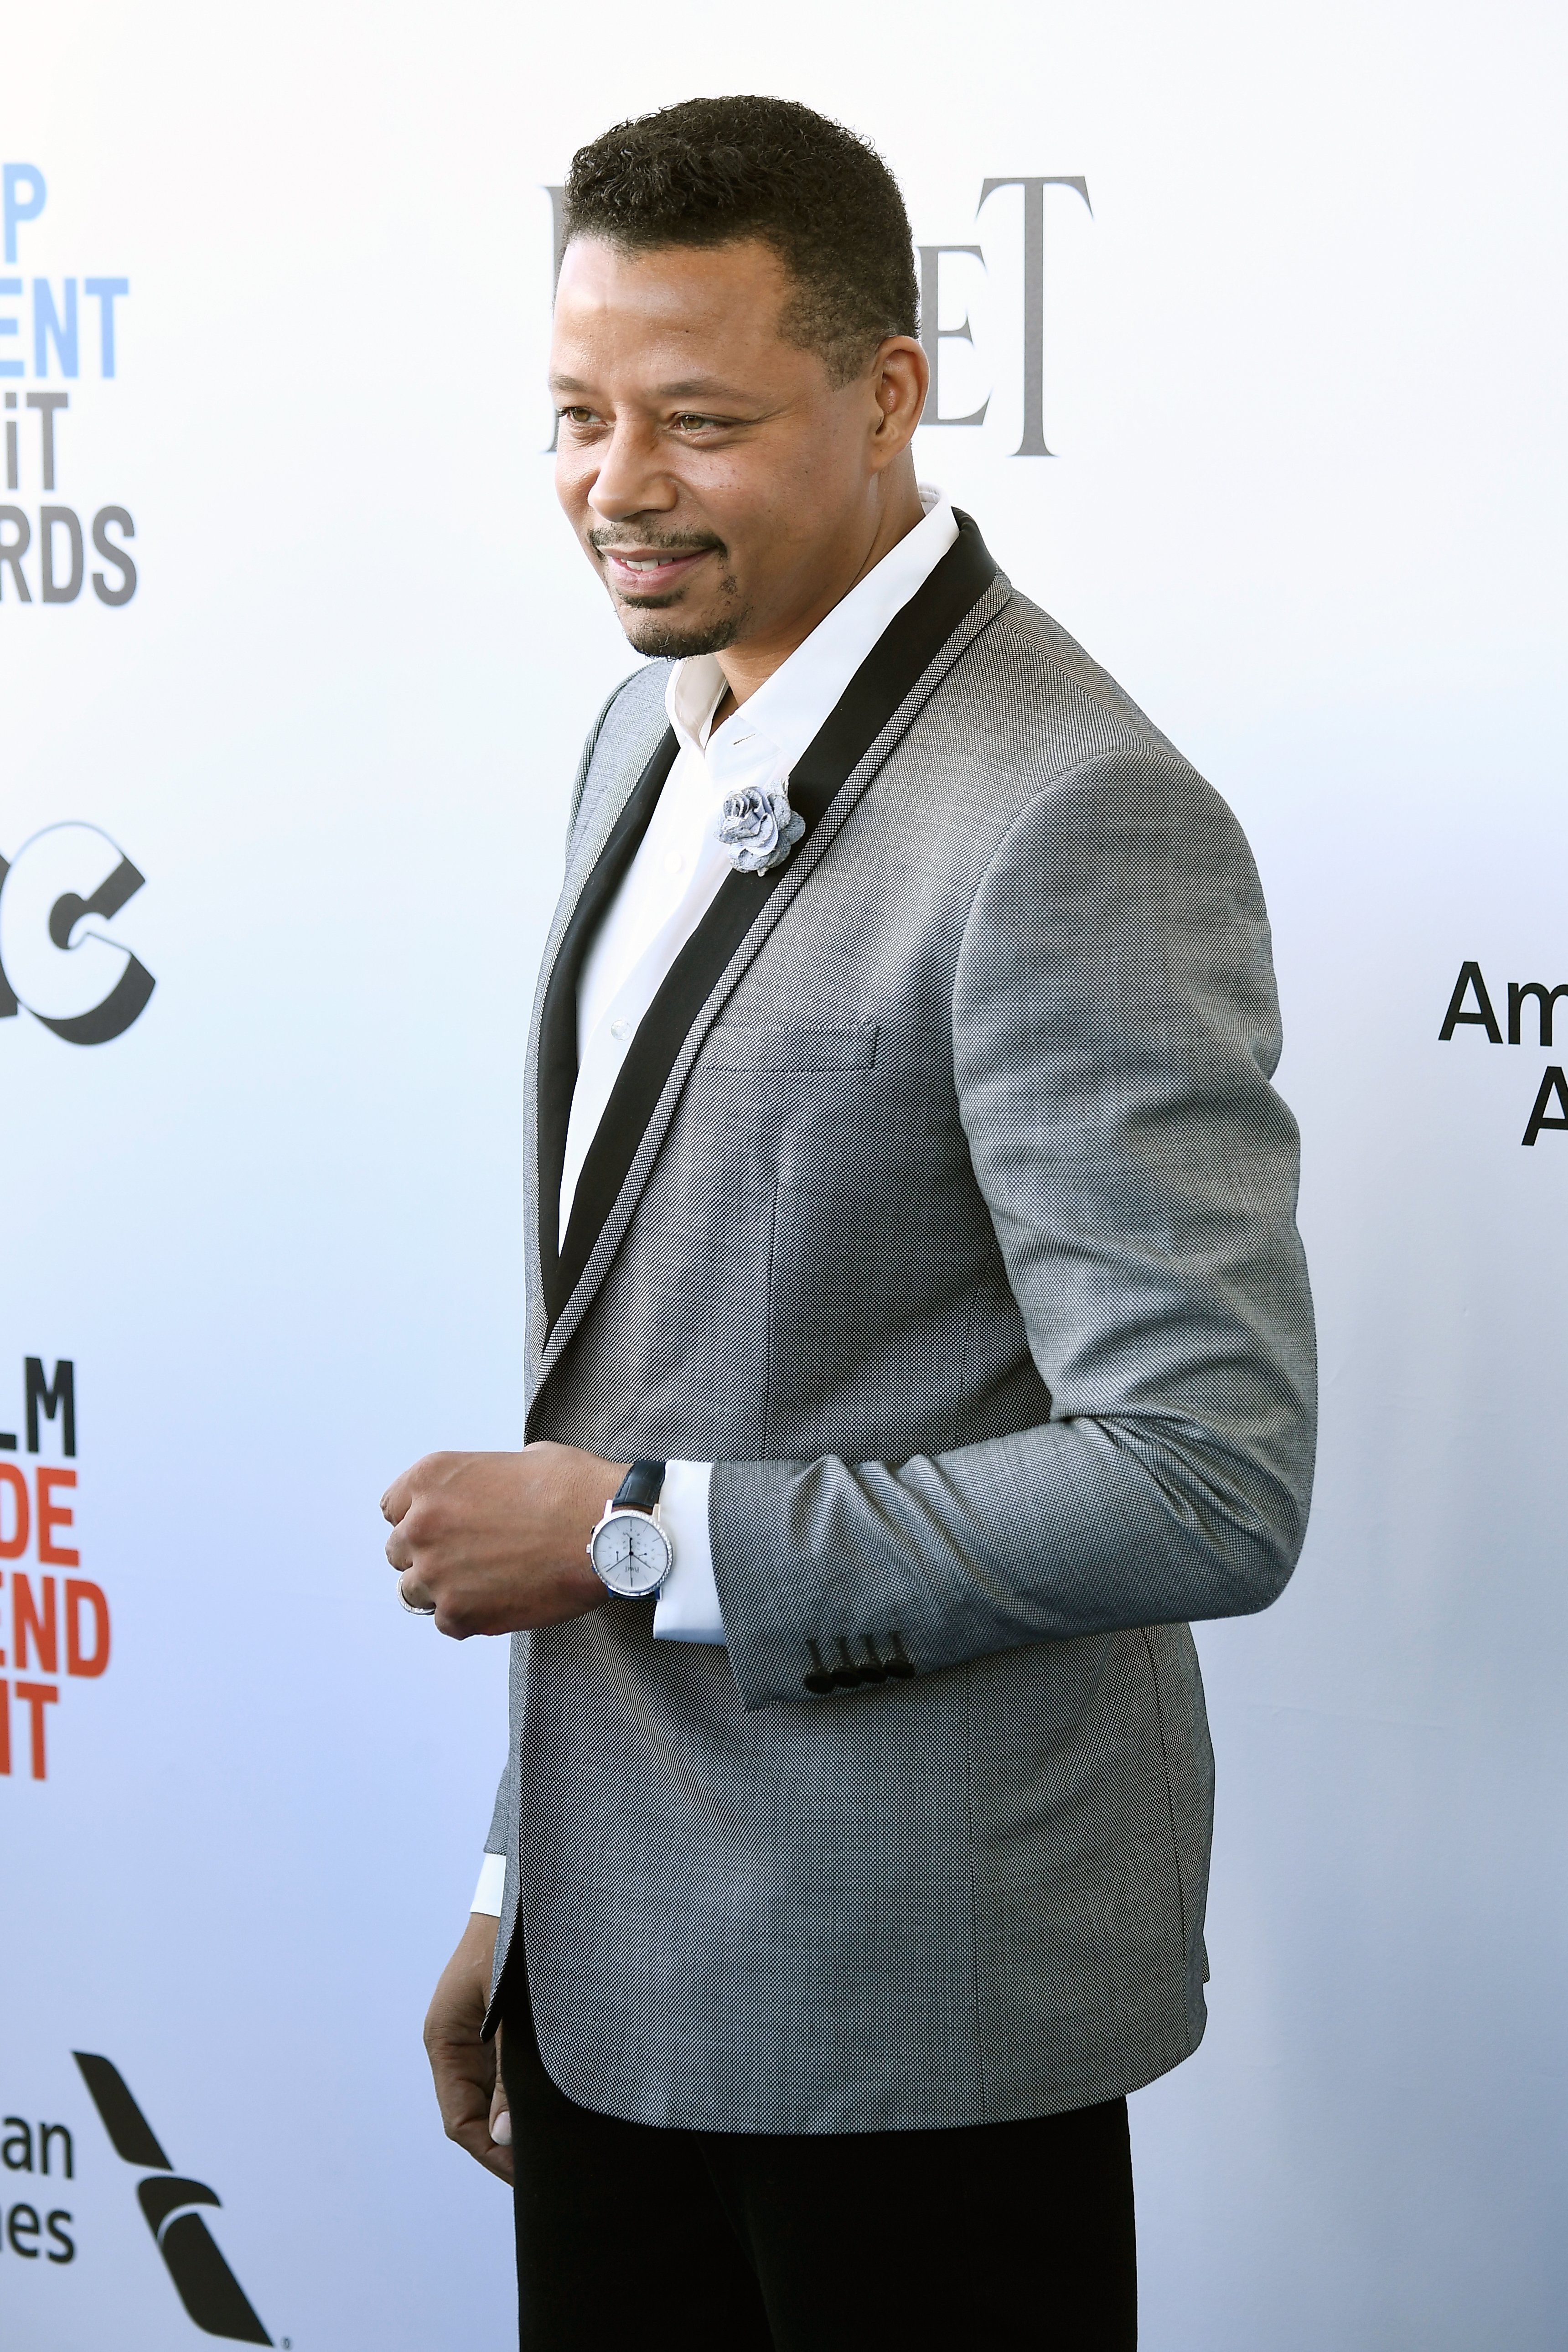 Terrence Howard at the 2017 Film Independent Spirit Awards on Feb. 25, 2017 in California | Photo: Getty Images